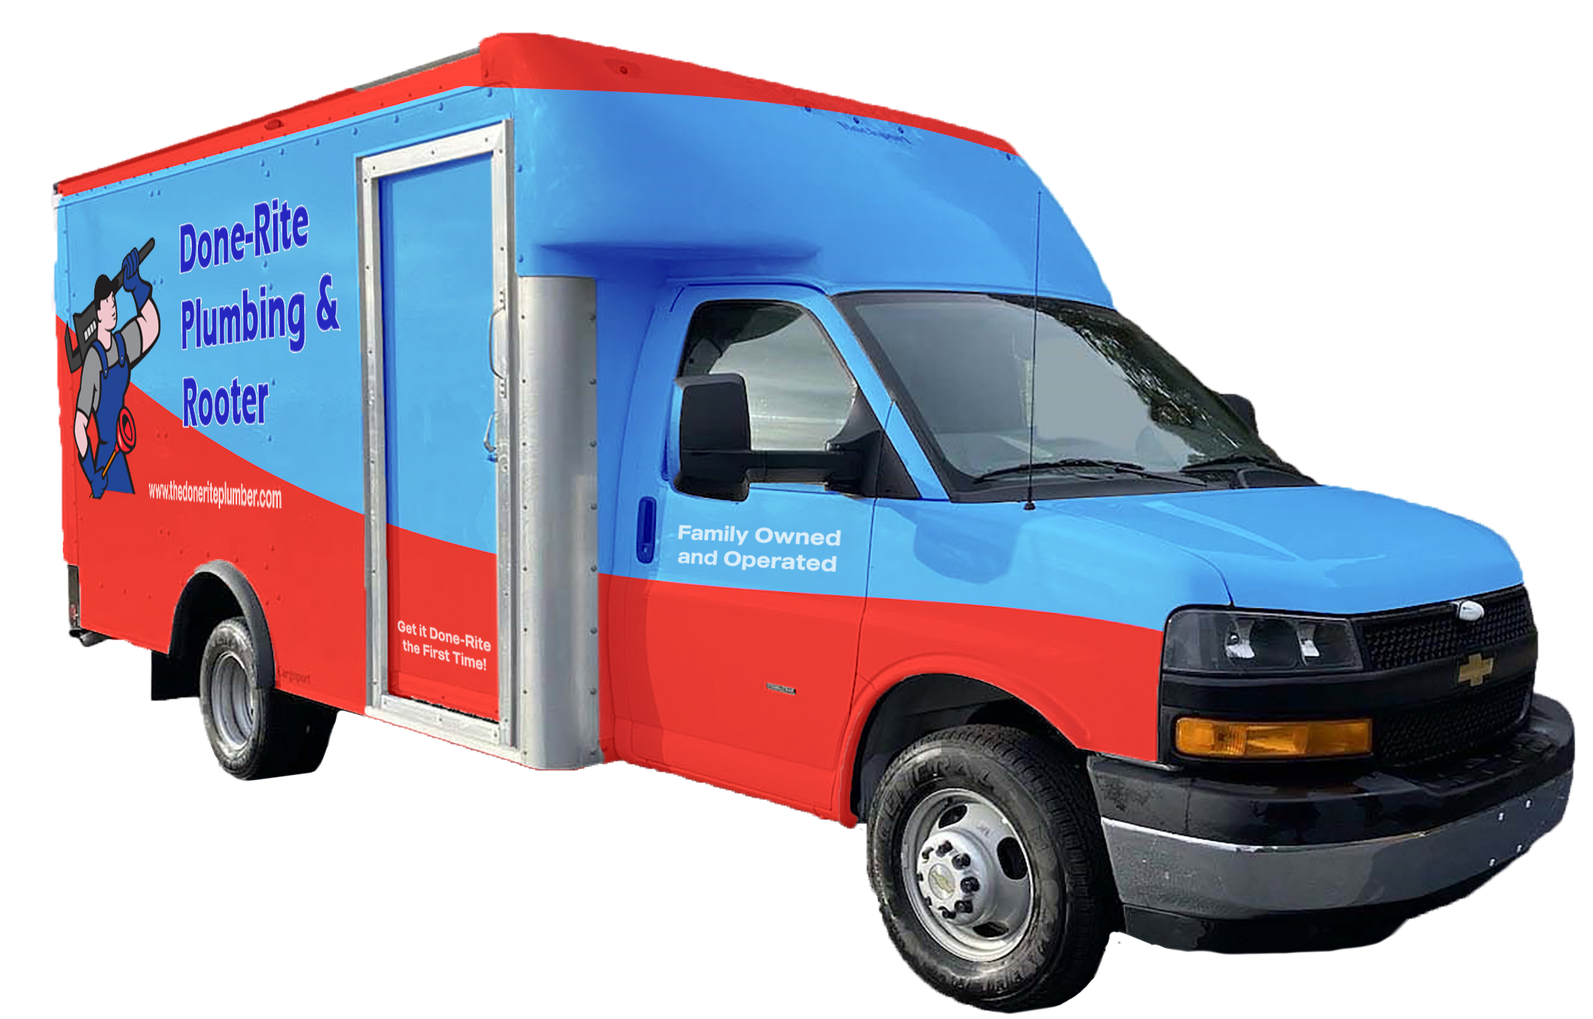 a blue and red van that says done-rite plumbing & rooter